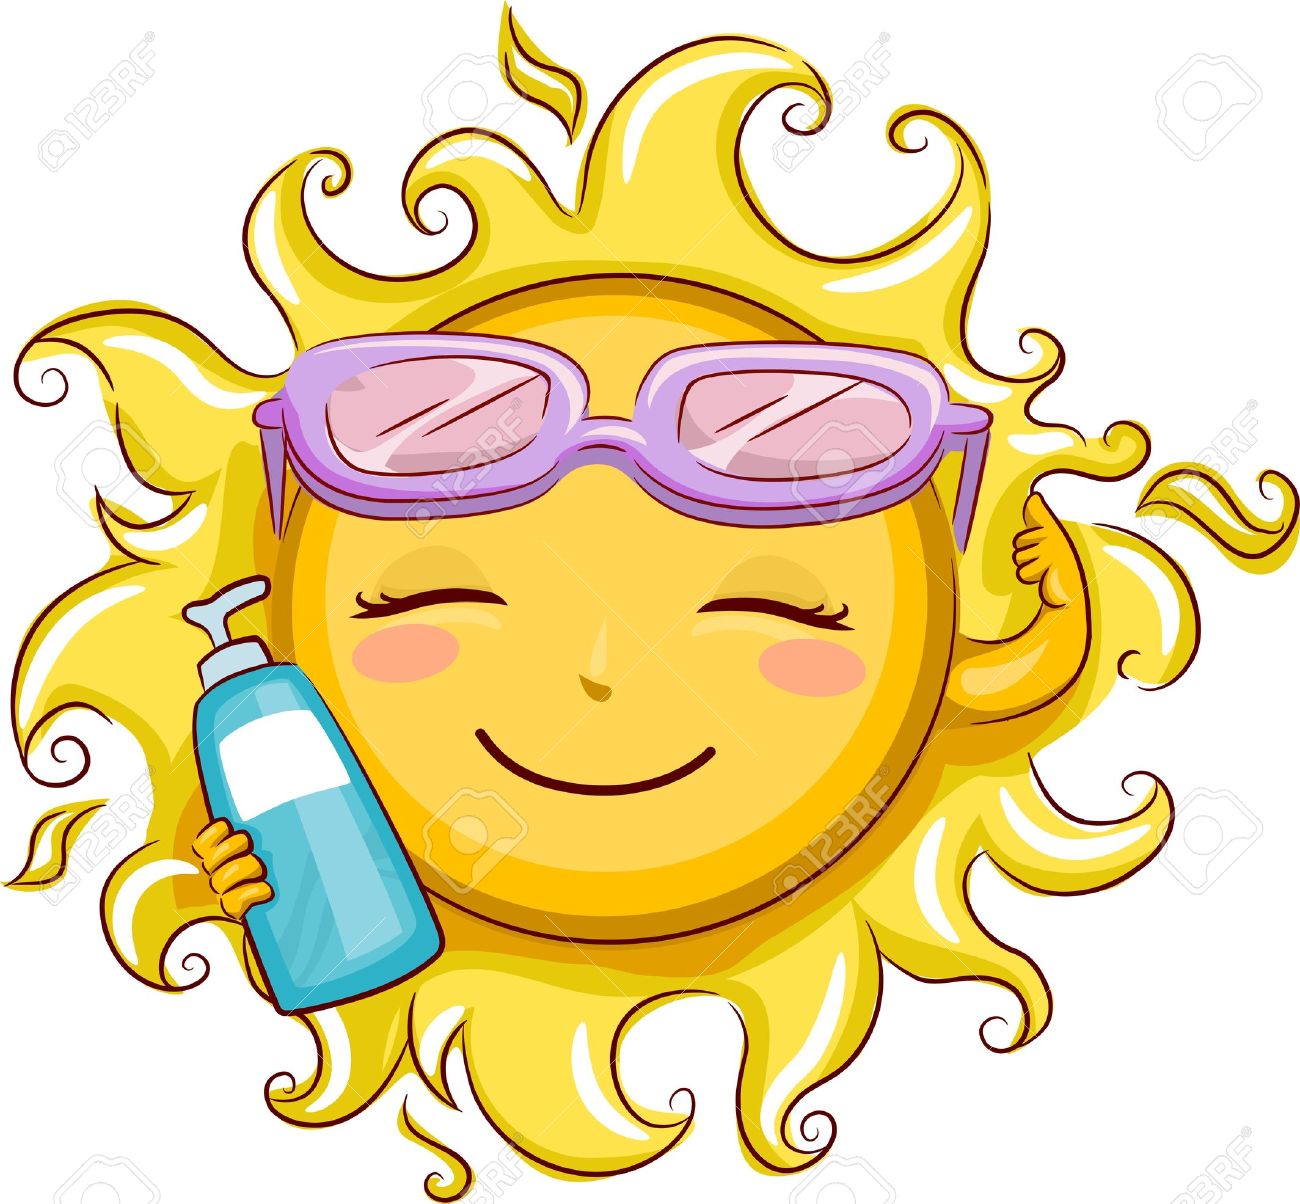 Sunscreen clipart - Clipground